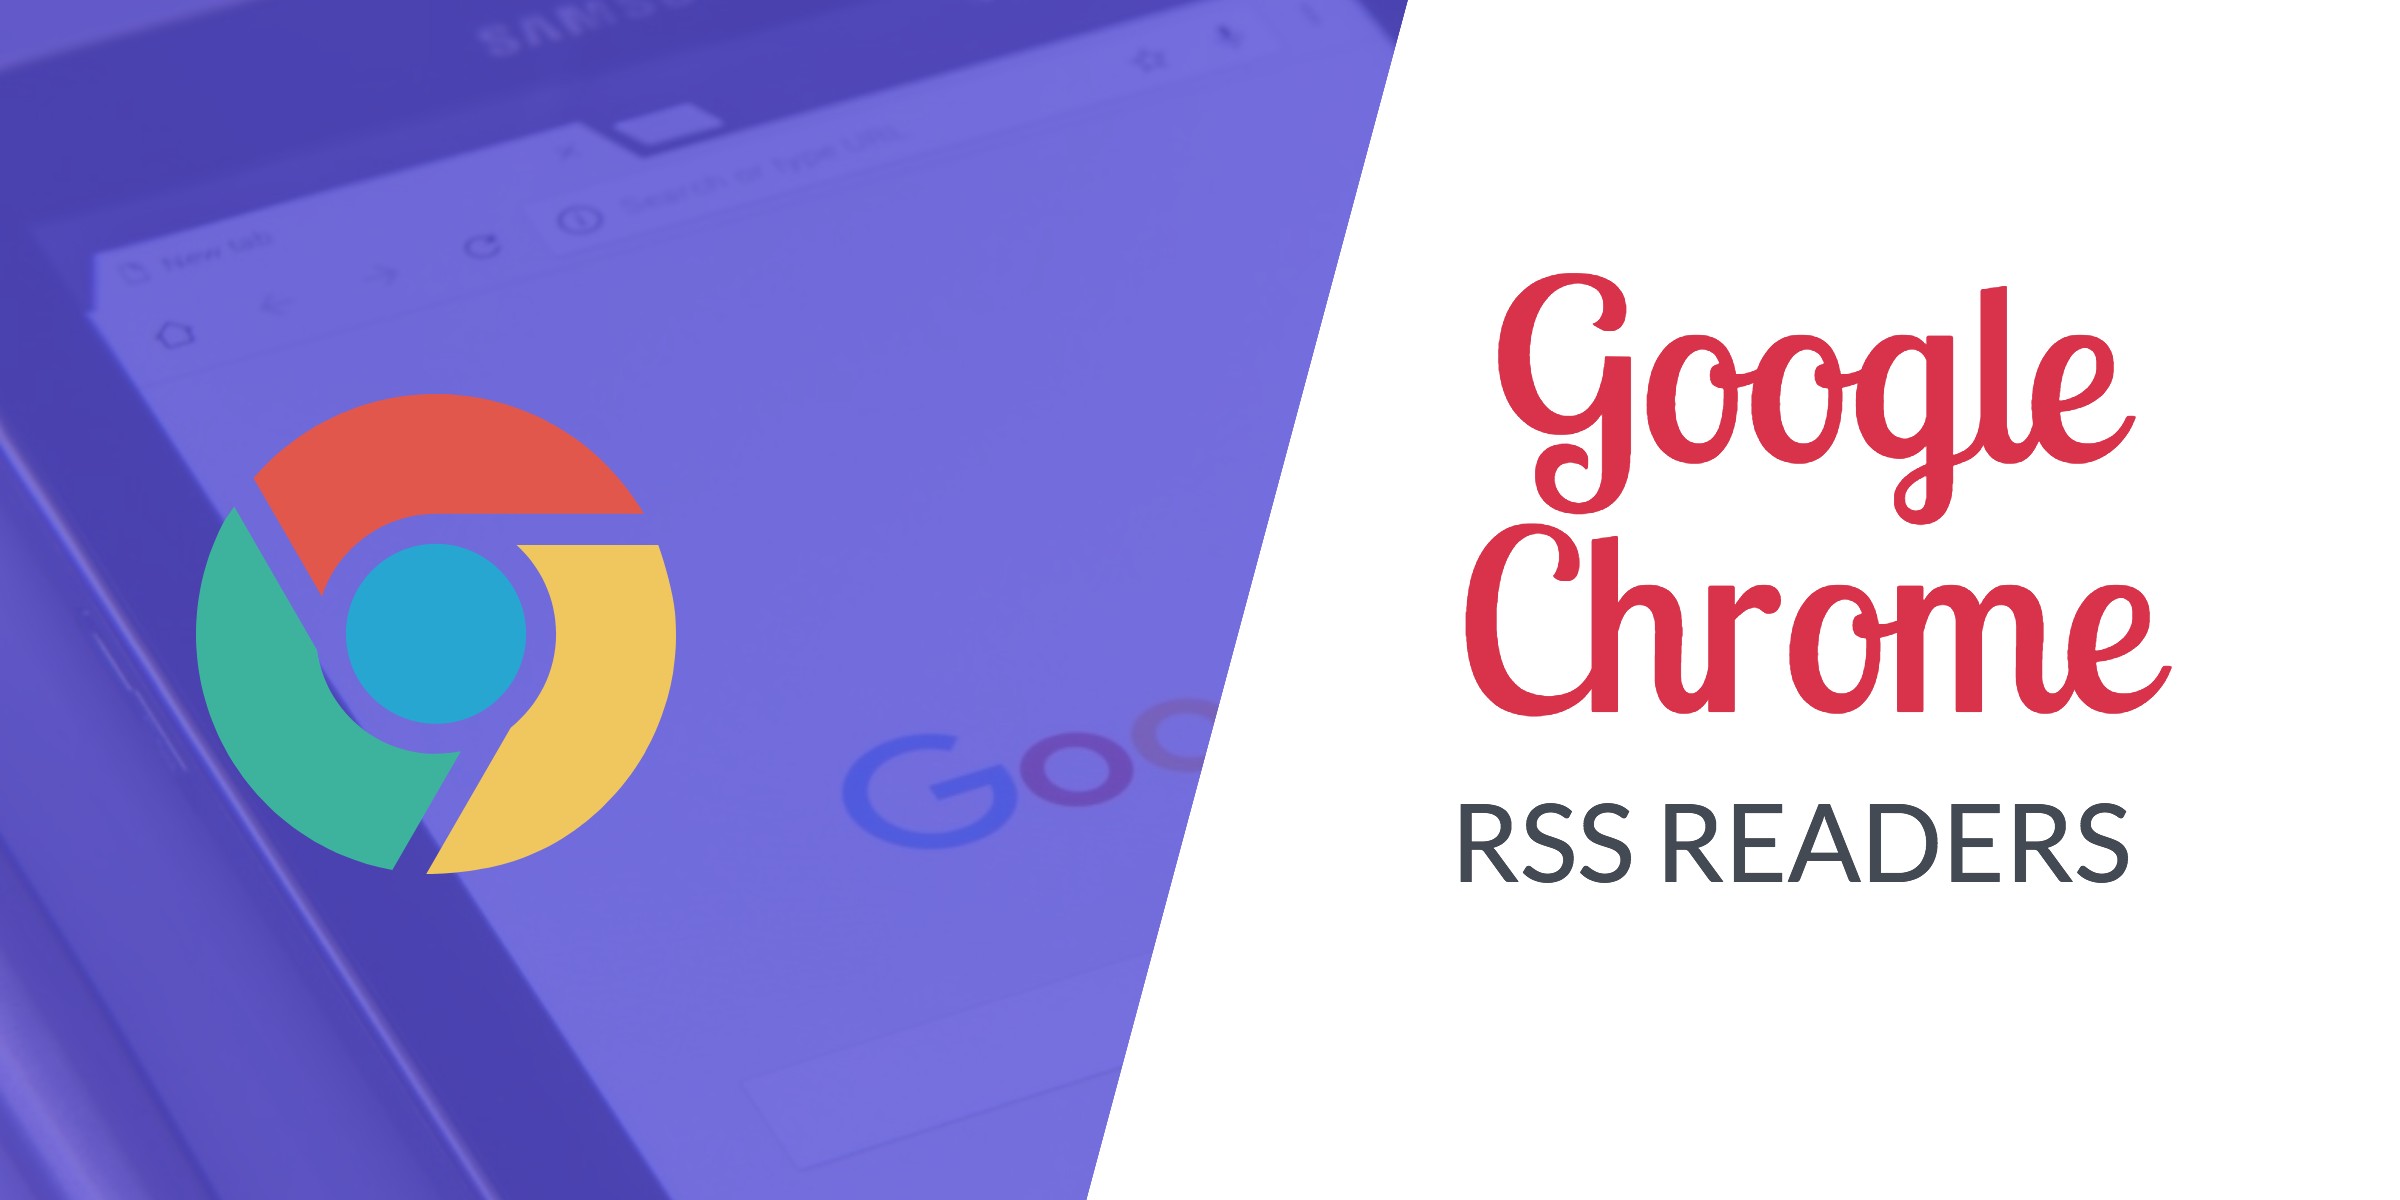 google chrome rss feed readers